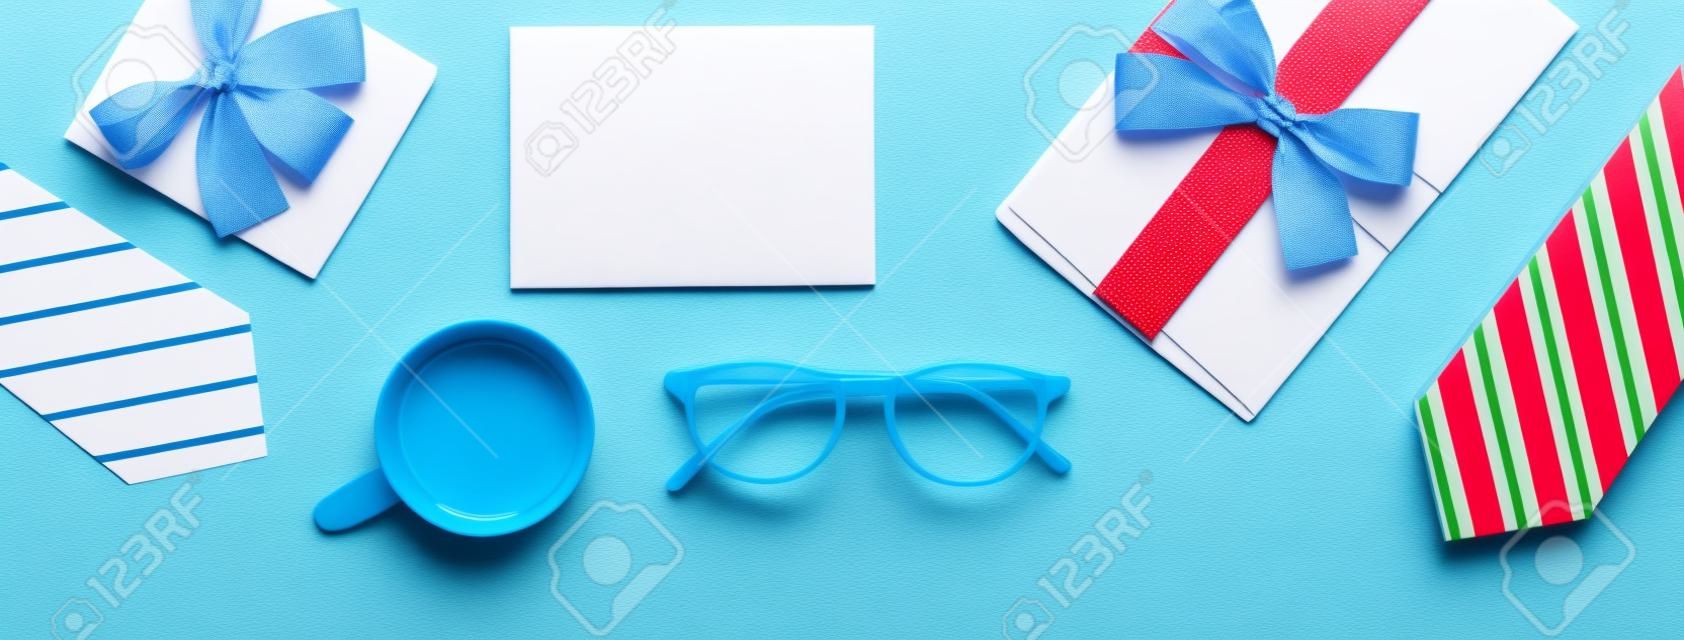 Father's Day gift. Top view design concept of holiday idea with greeting card on blue table background.